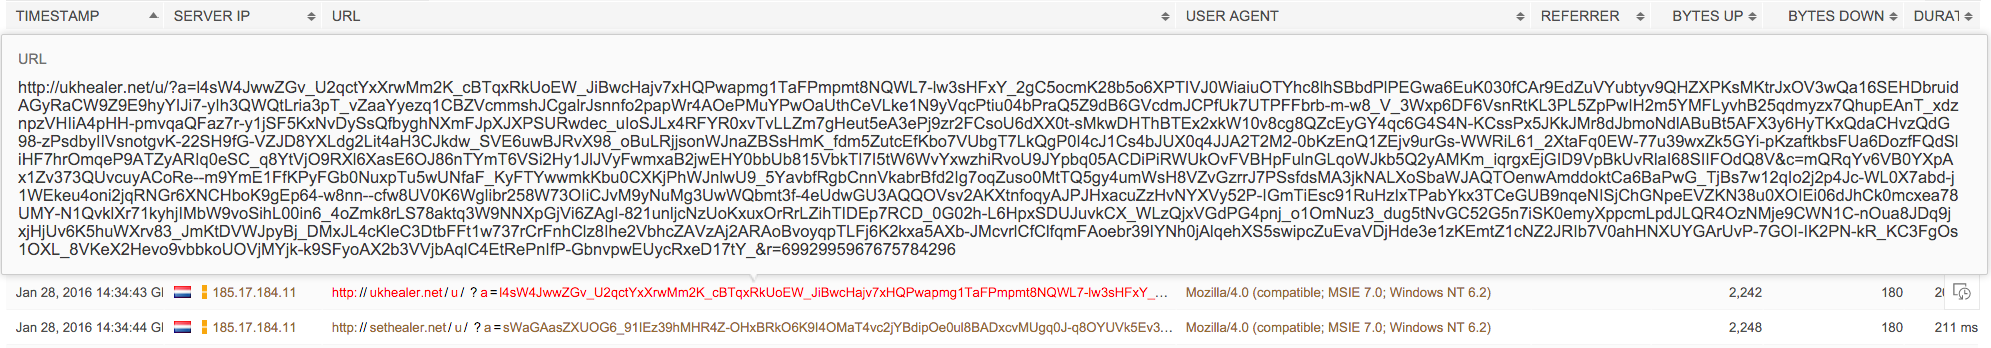 1. Example of encoded URL